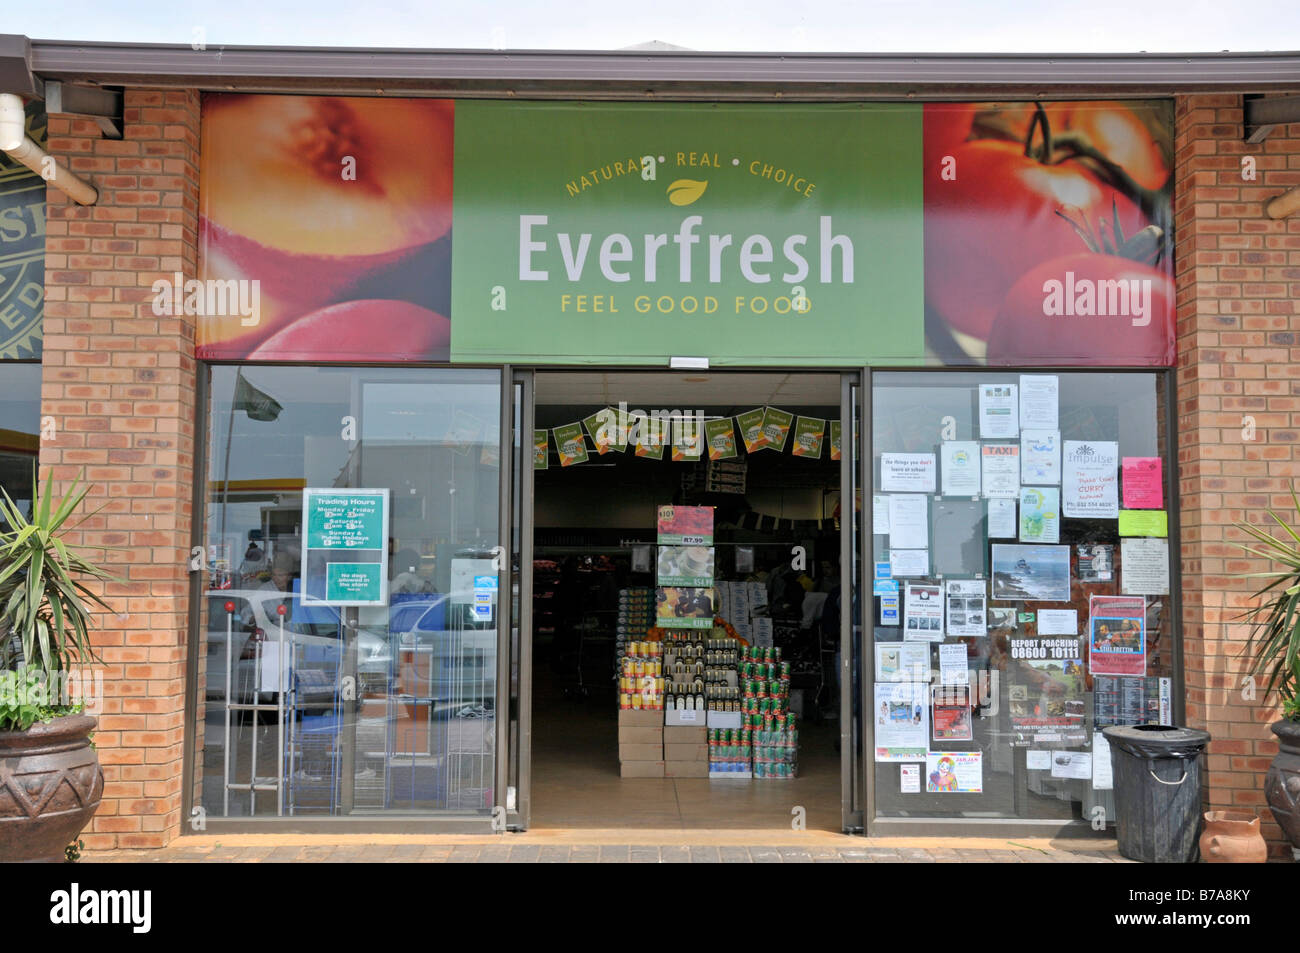 Everfresh wholefood shop in South Africa, Africa Stock Photo